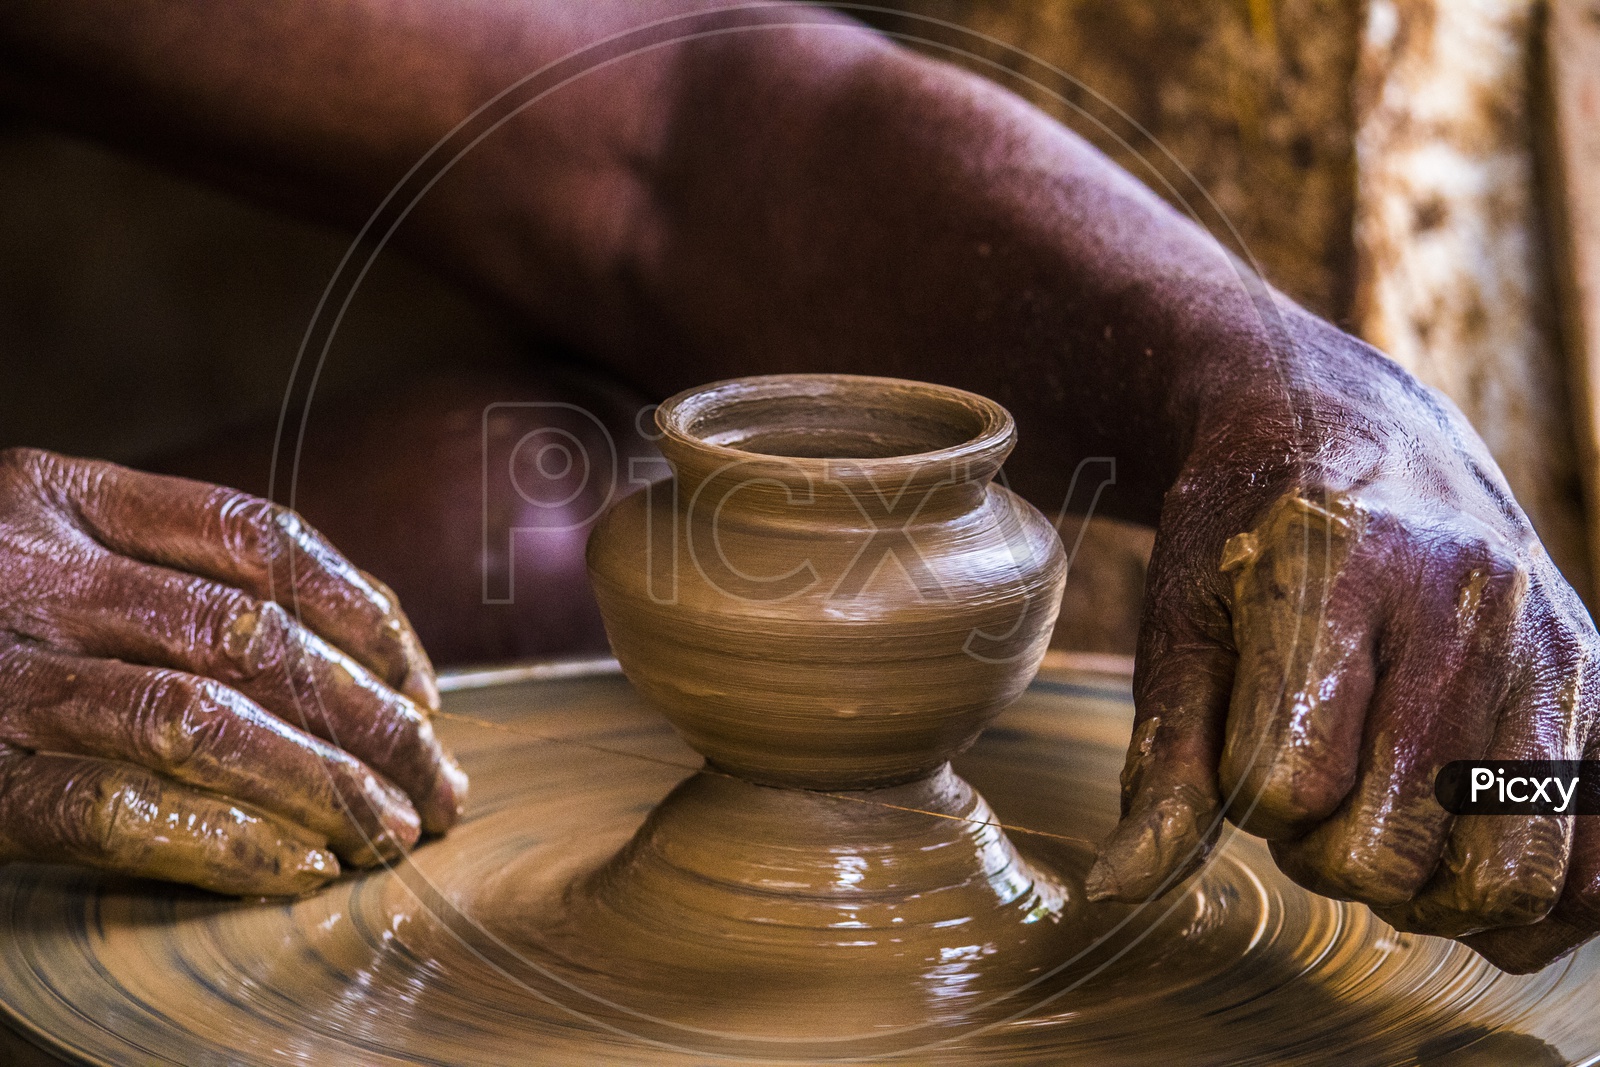 The making by the Potter